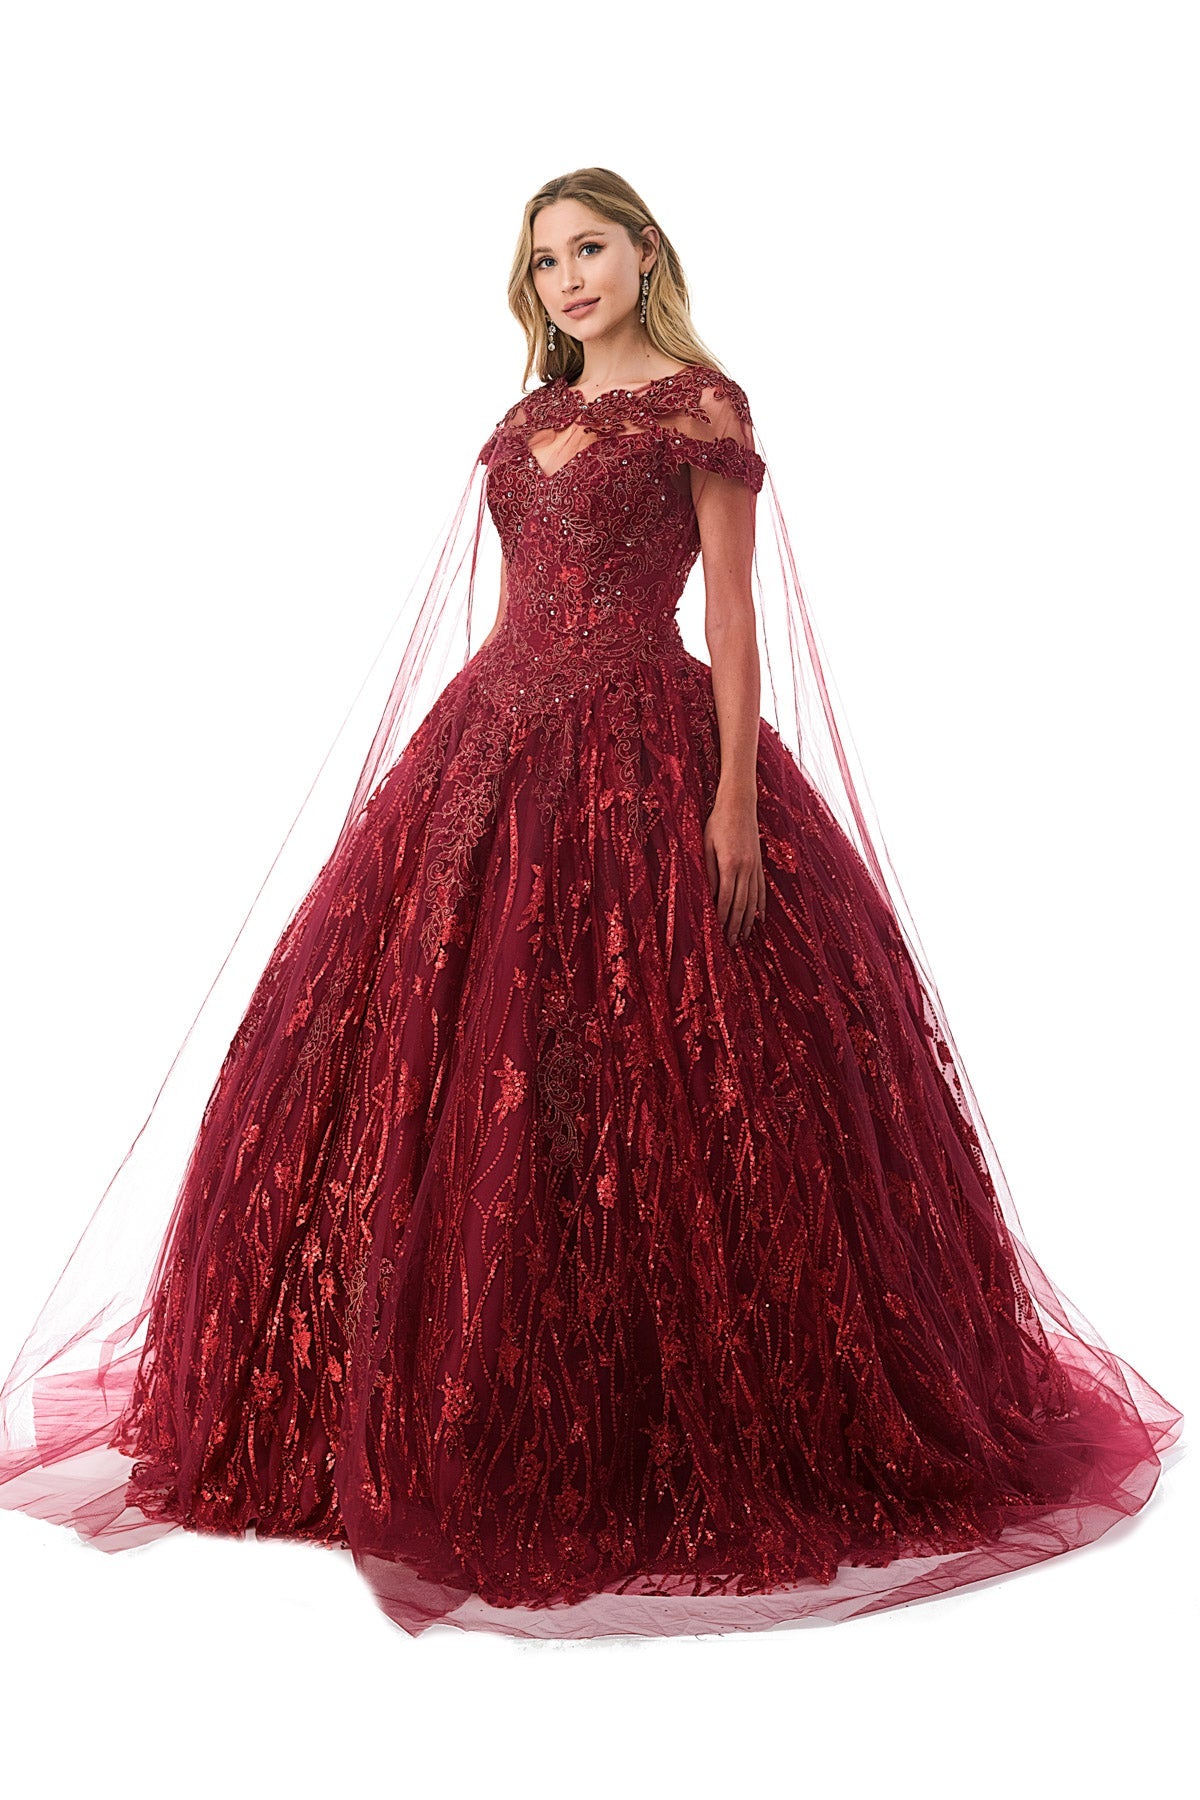 Aspeed L2804C  Floral & Sequin Burgundy Ball Gown | 3 Colors - NORMA REED